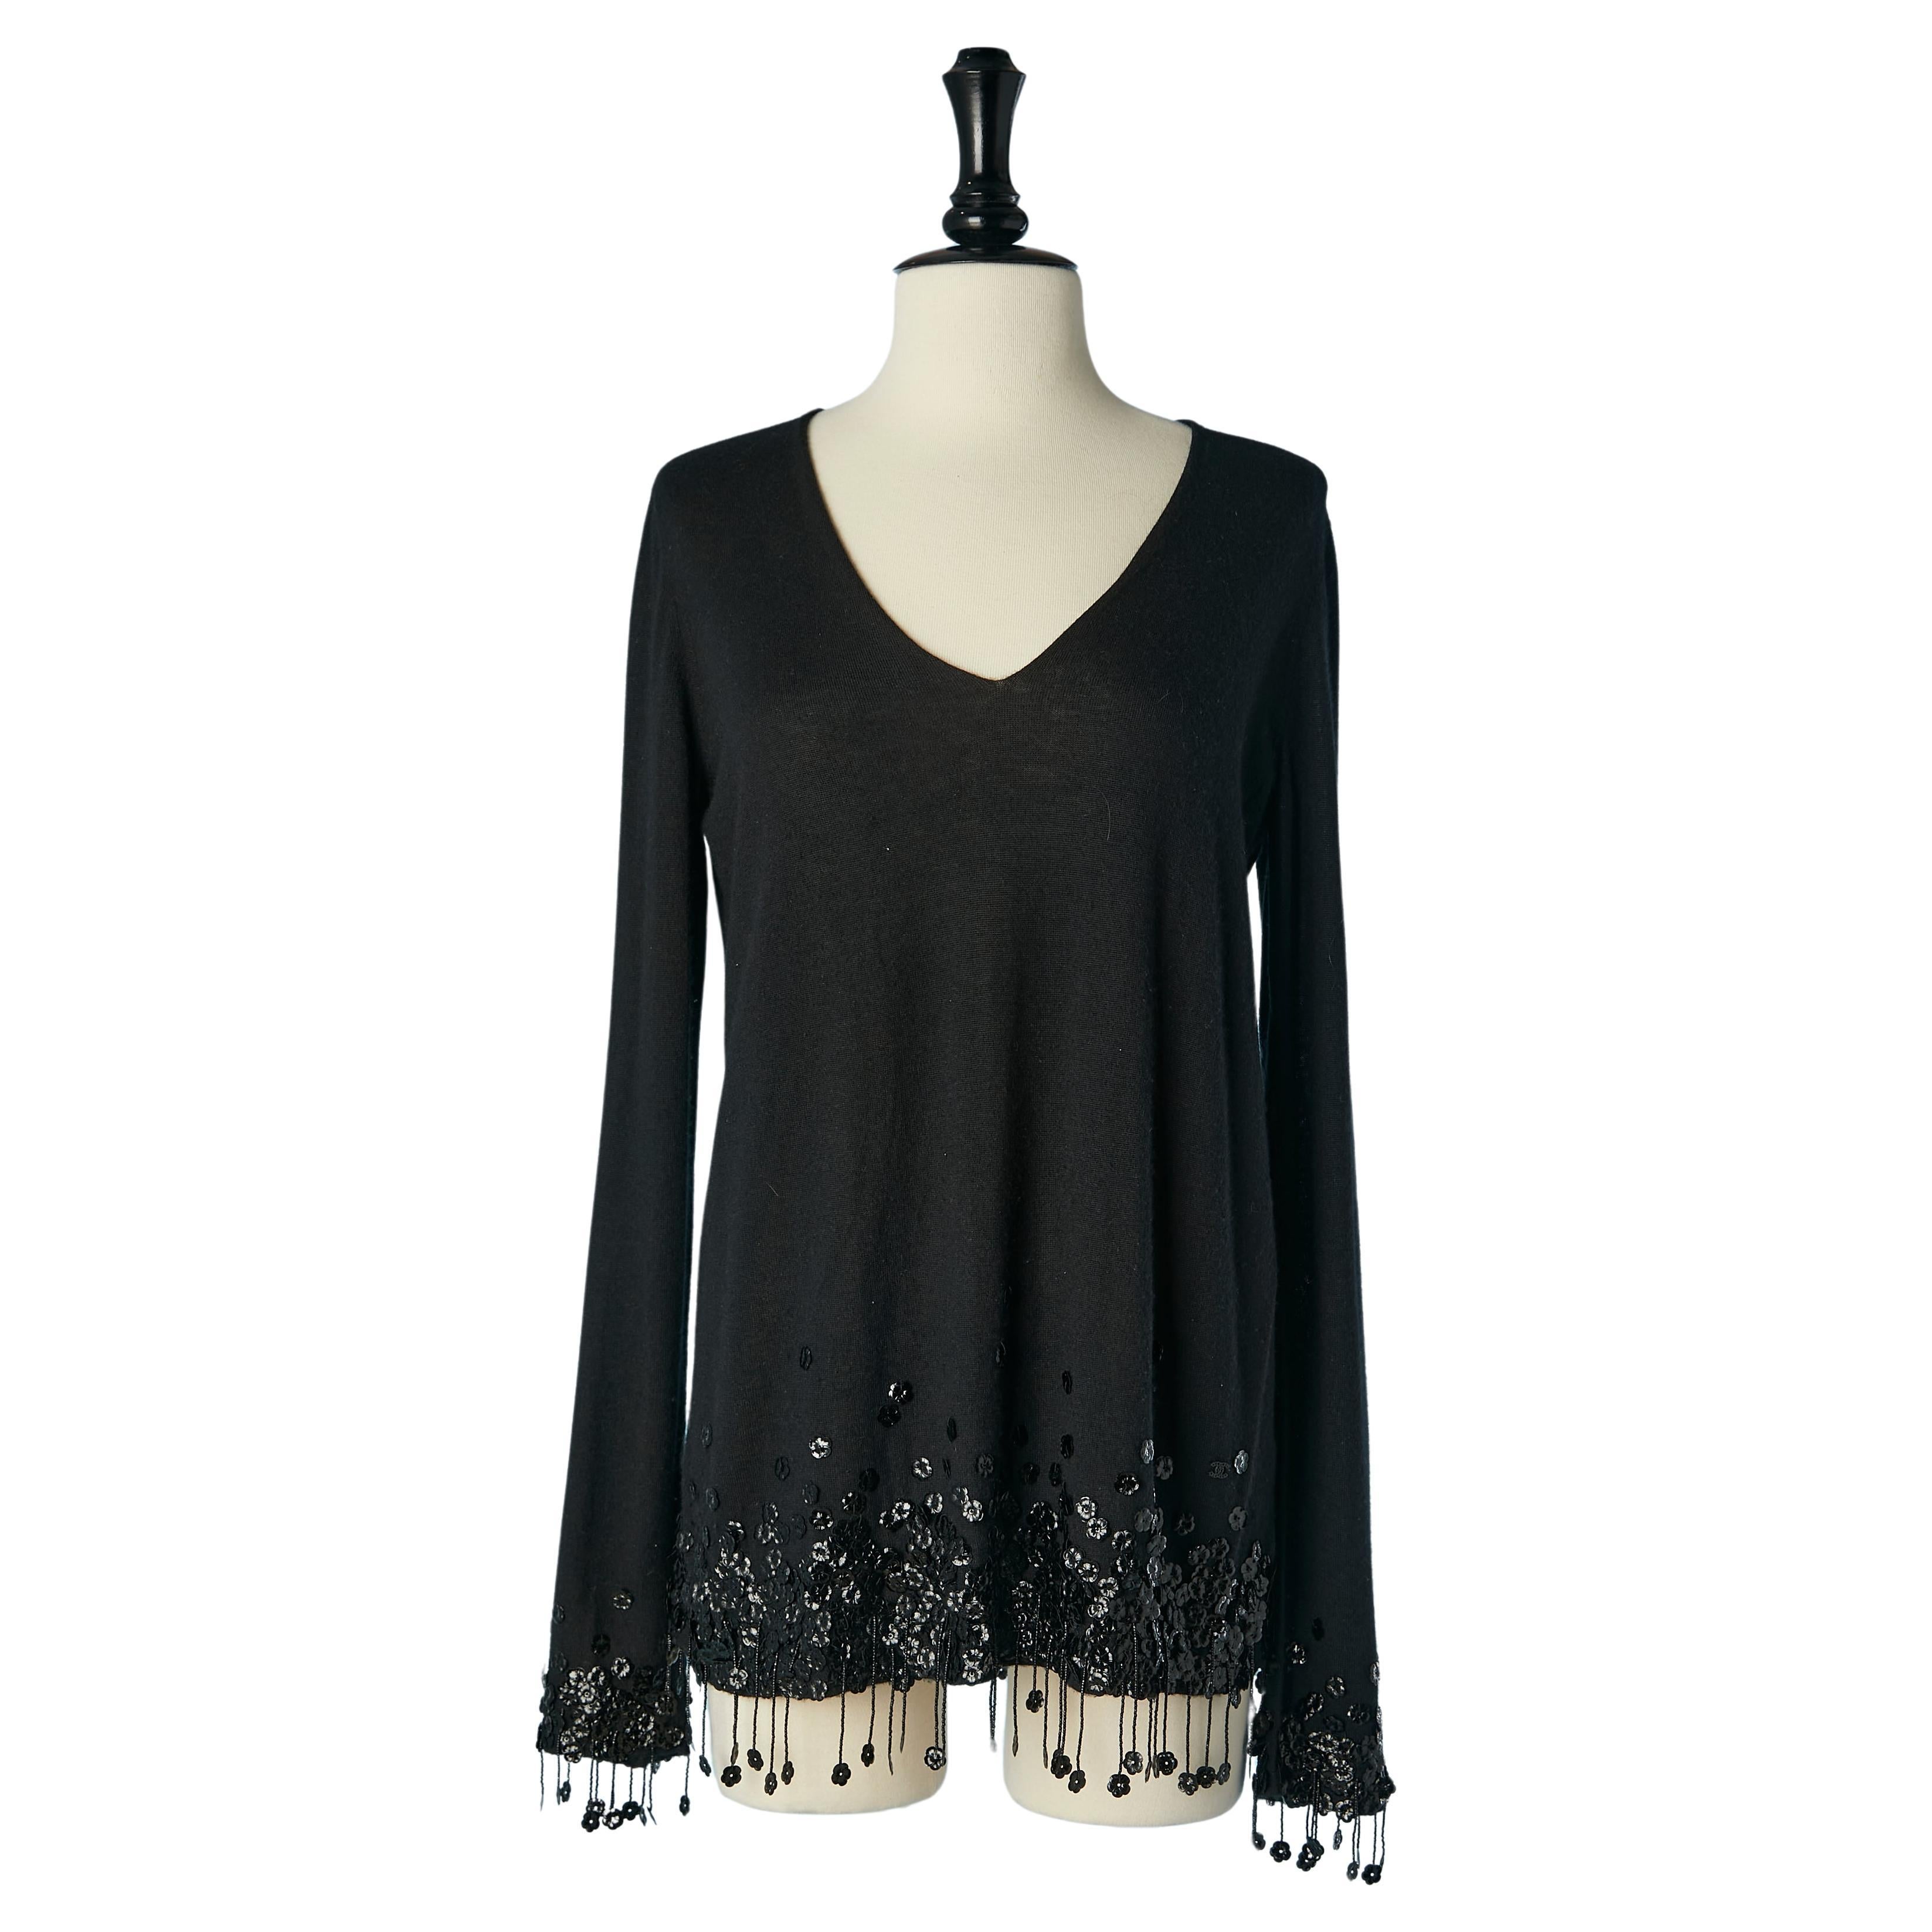 Black cashmere sweater with flowers and beads fringes embellishment Chanel  For Sale